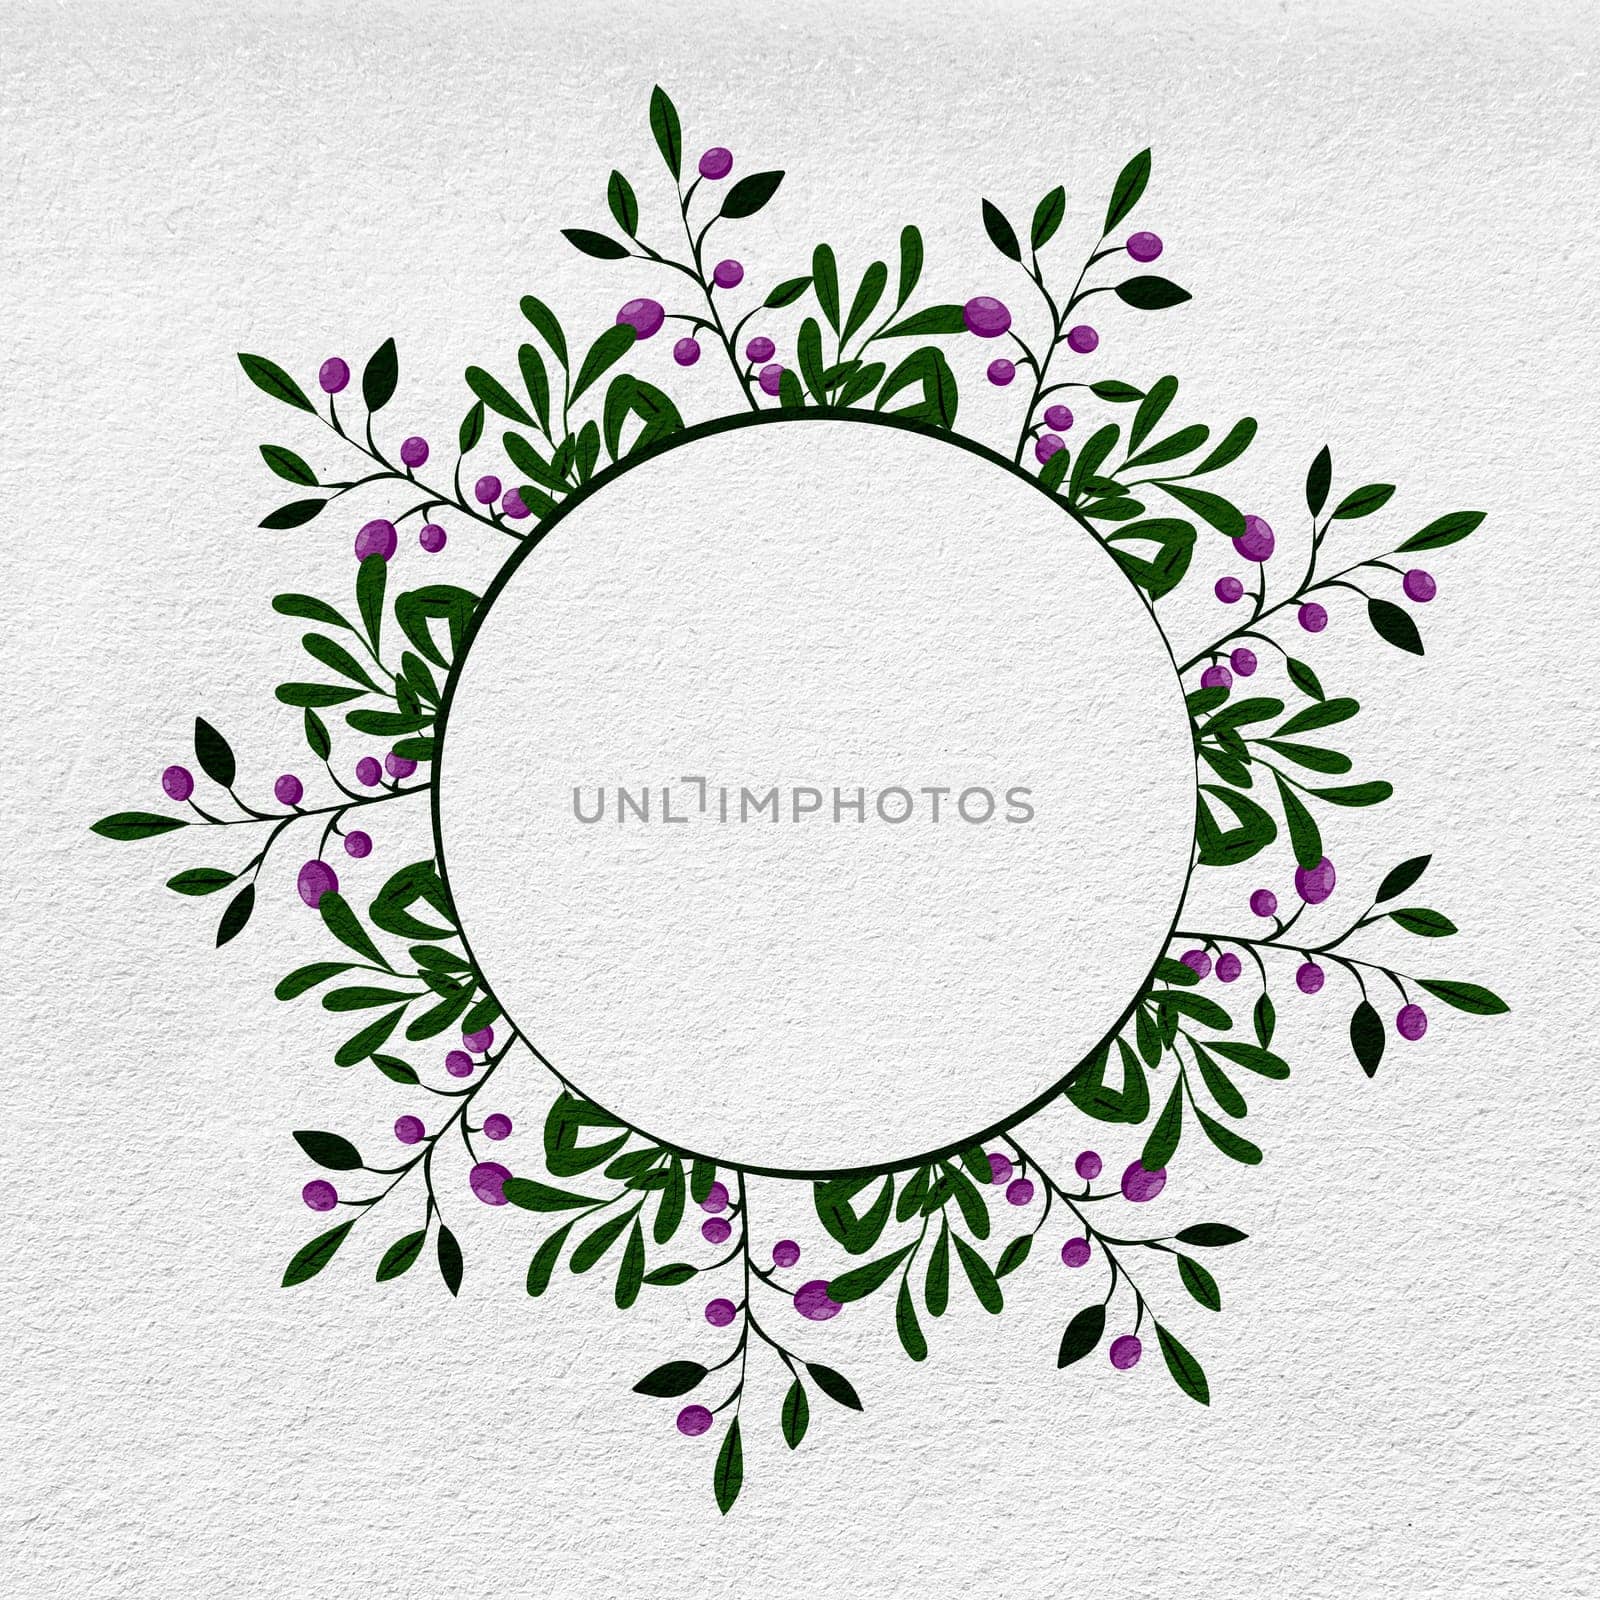 Circular Frame With Purple Flowers and Green Leaves by TalmachZoya